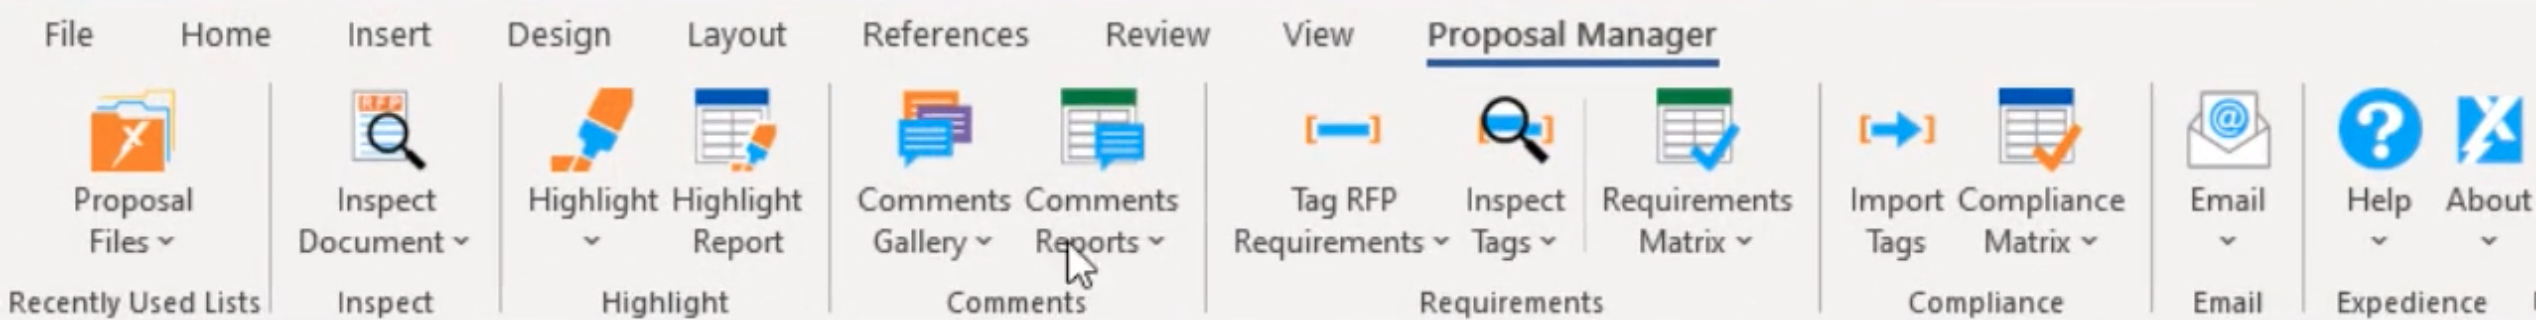 Proposal Manager Software & RFP Response Management in Microsoft Word